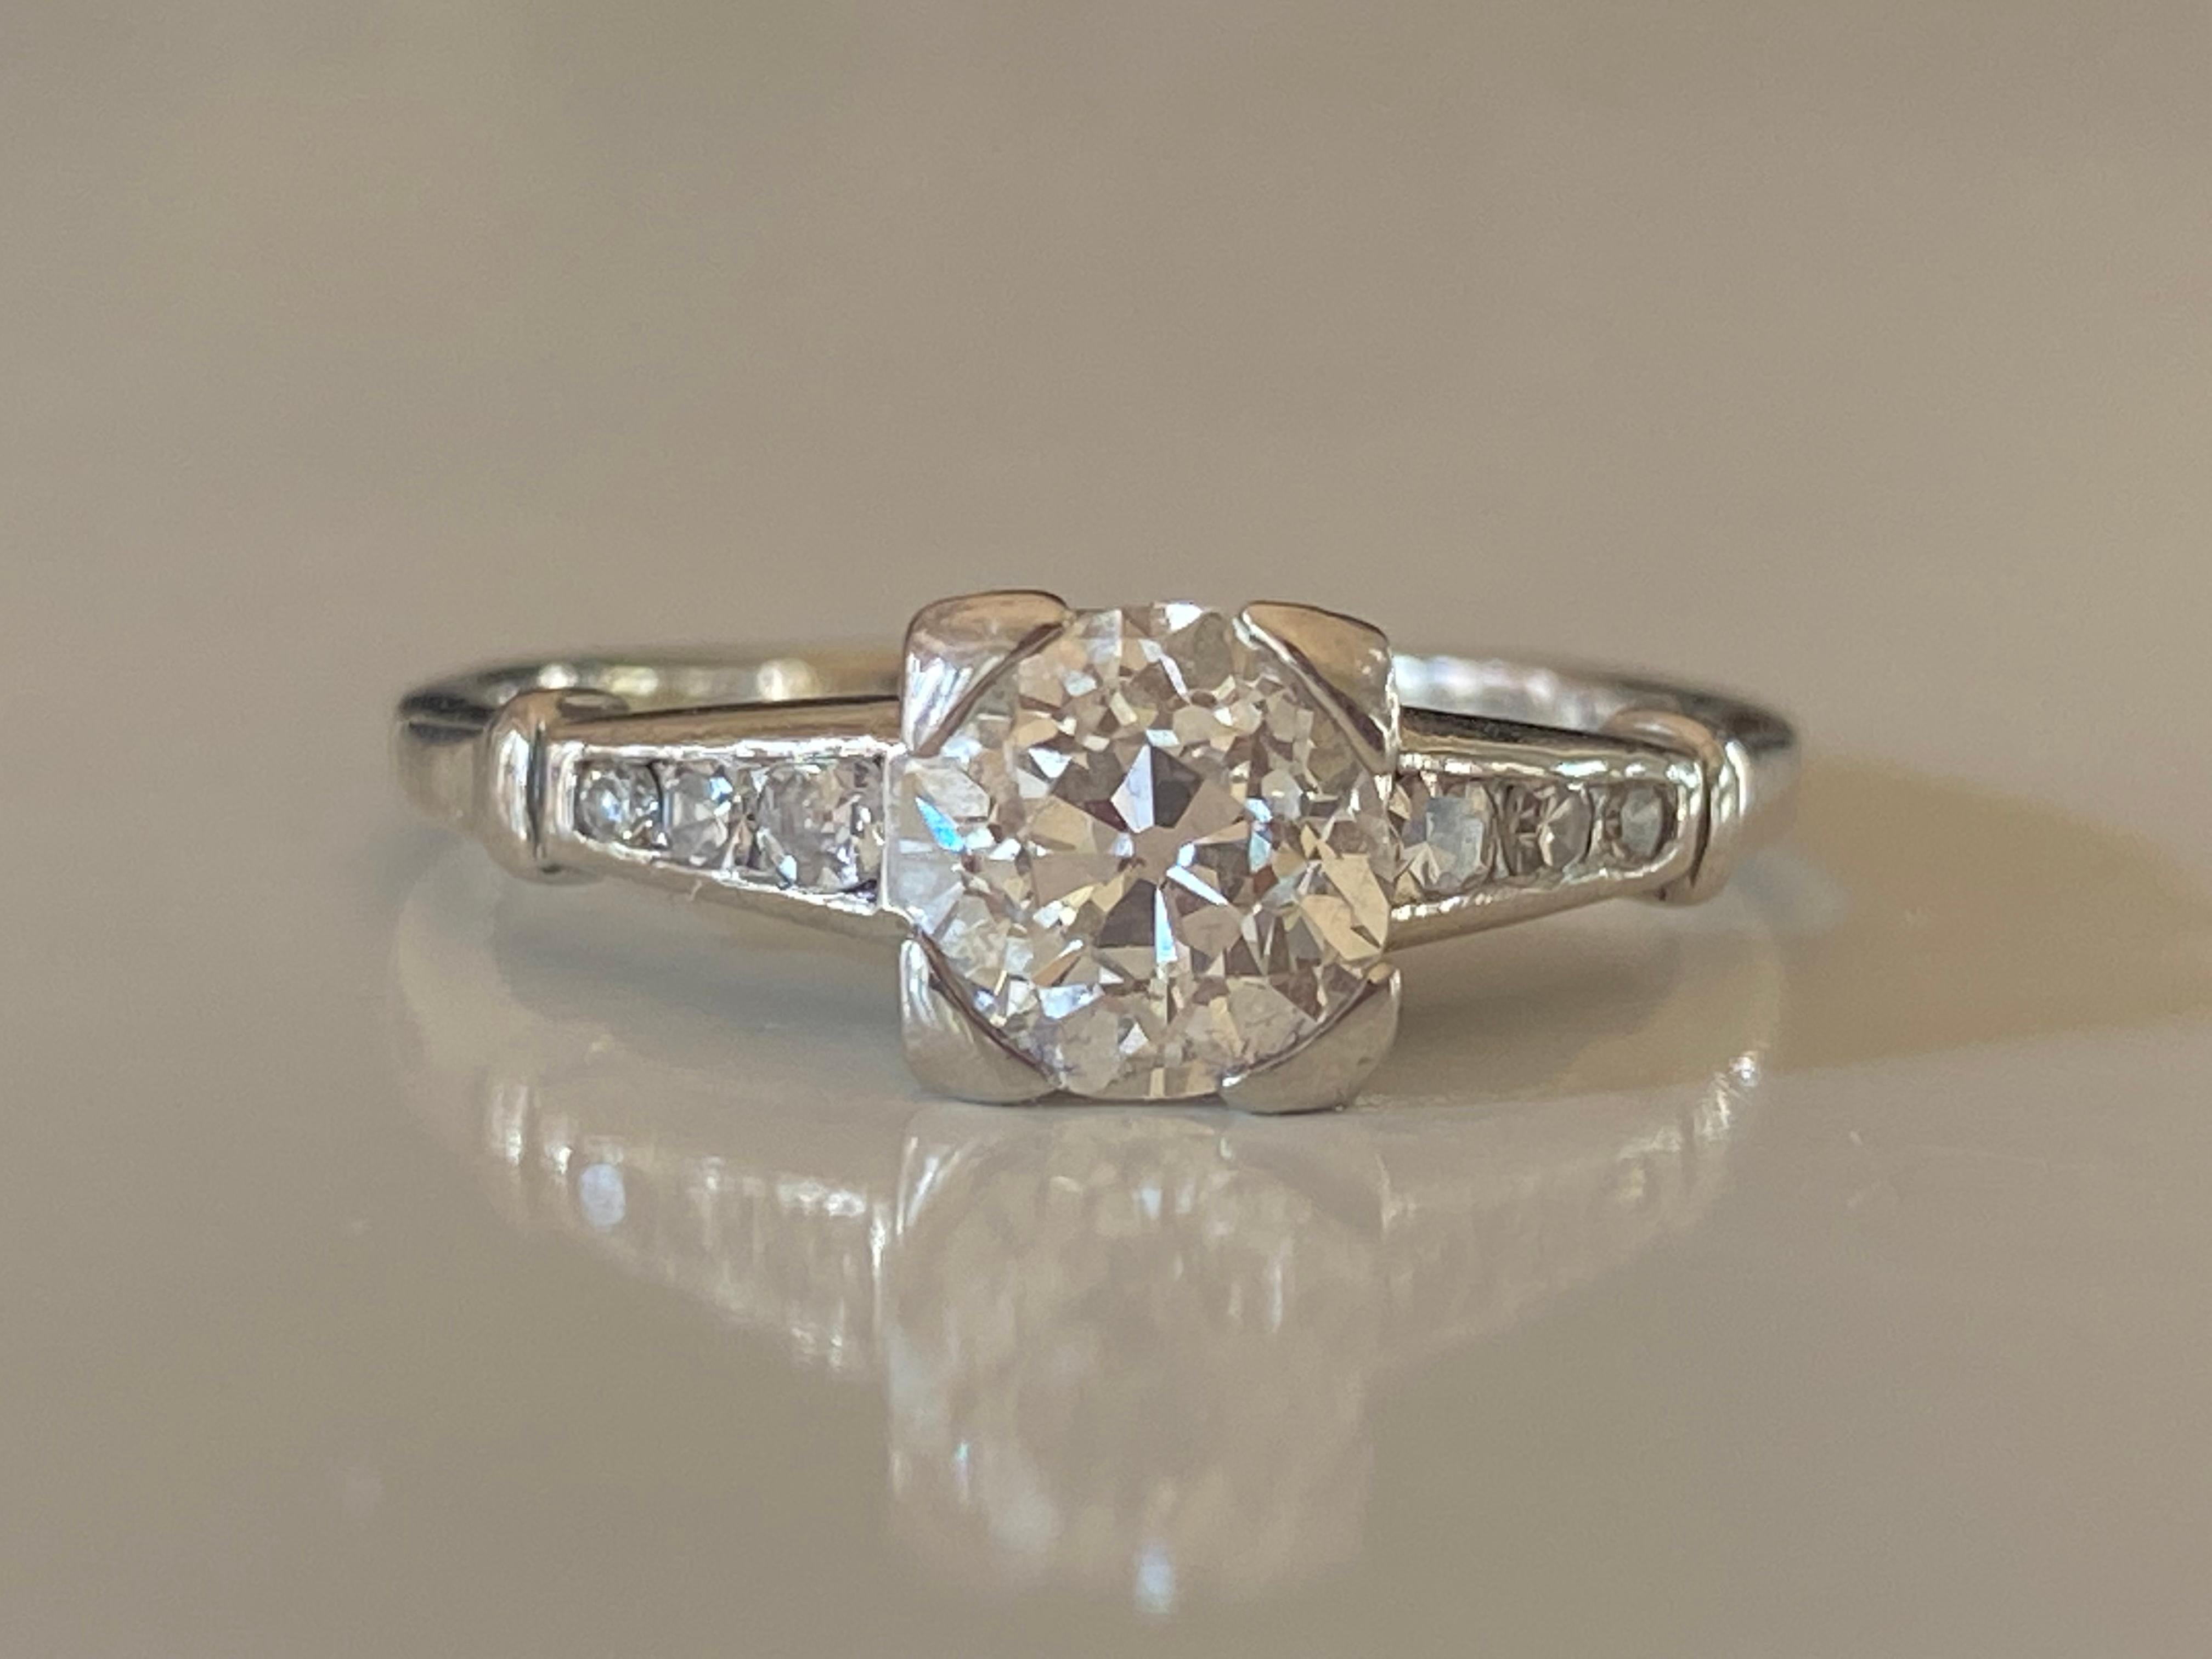 This stunning band is meticulously crafted in platinum and set with a striking Old European cut center stone totaling 1.01 carat, G-H color, SI1 clarity and  flanked by six single cut diamonds totaling 0.12 carats, F color, SI1 clarity. Circa 1940s.